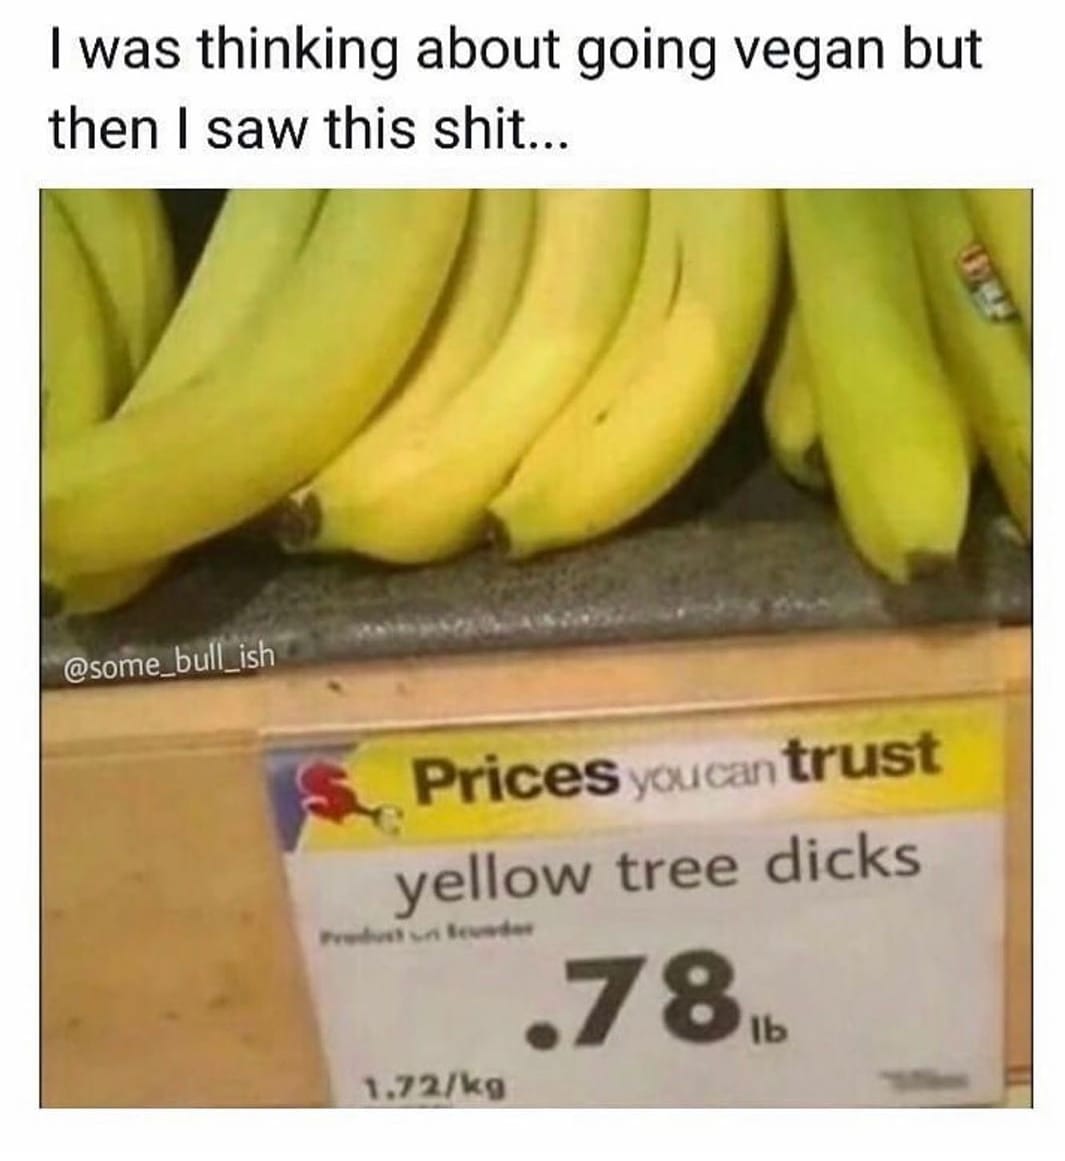 cinnamon toast fuck - I was thinking about going vegan but then I saw this shit... Prices you can trust yellow tree dicks .786 1.72kg